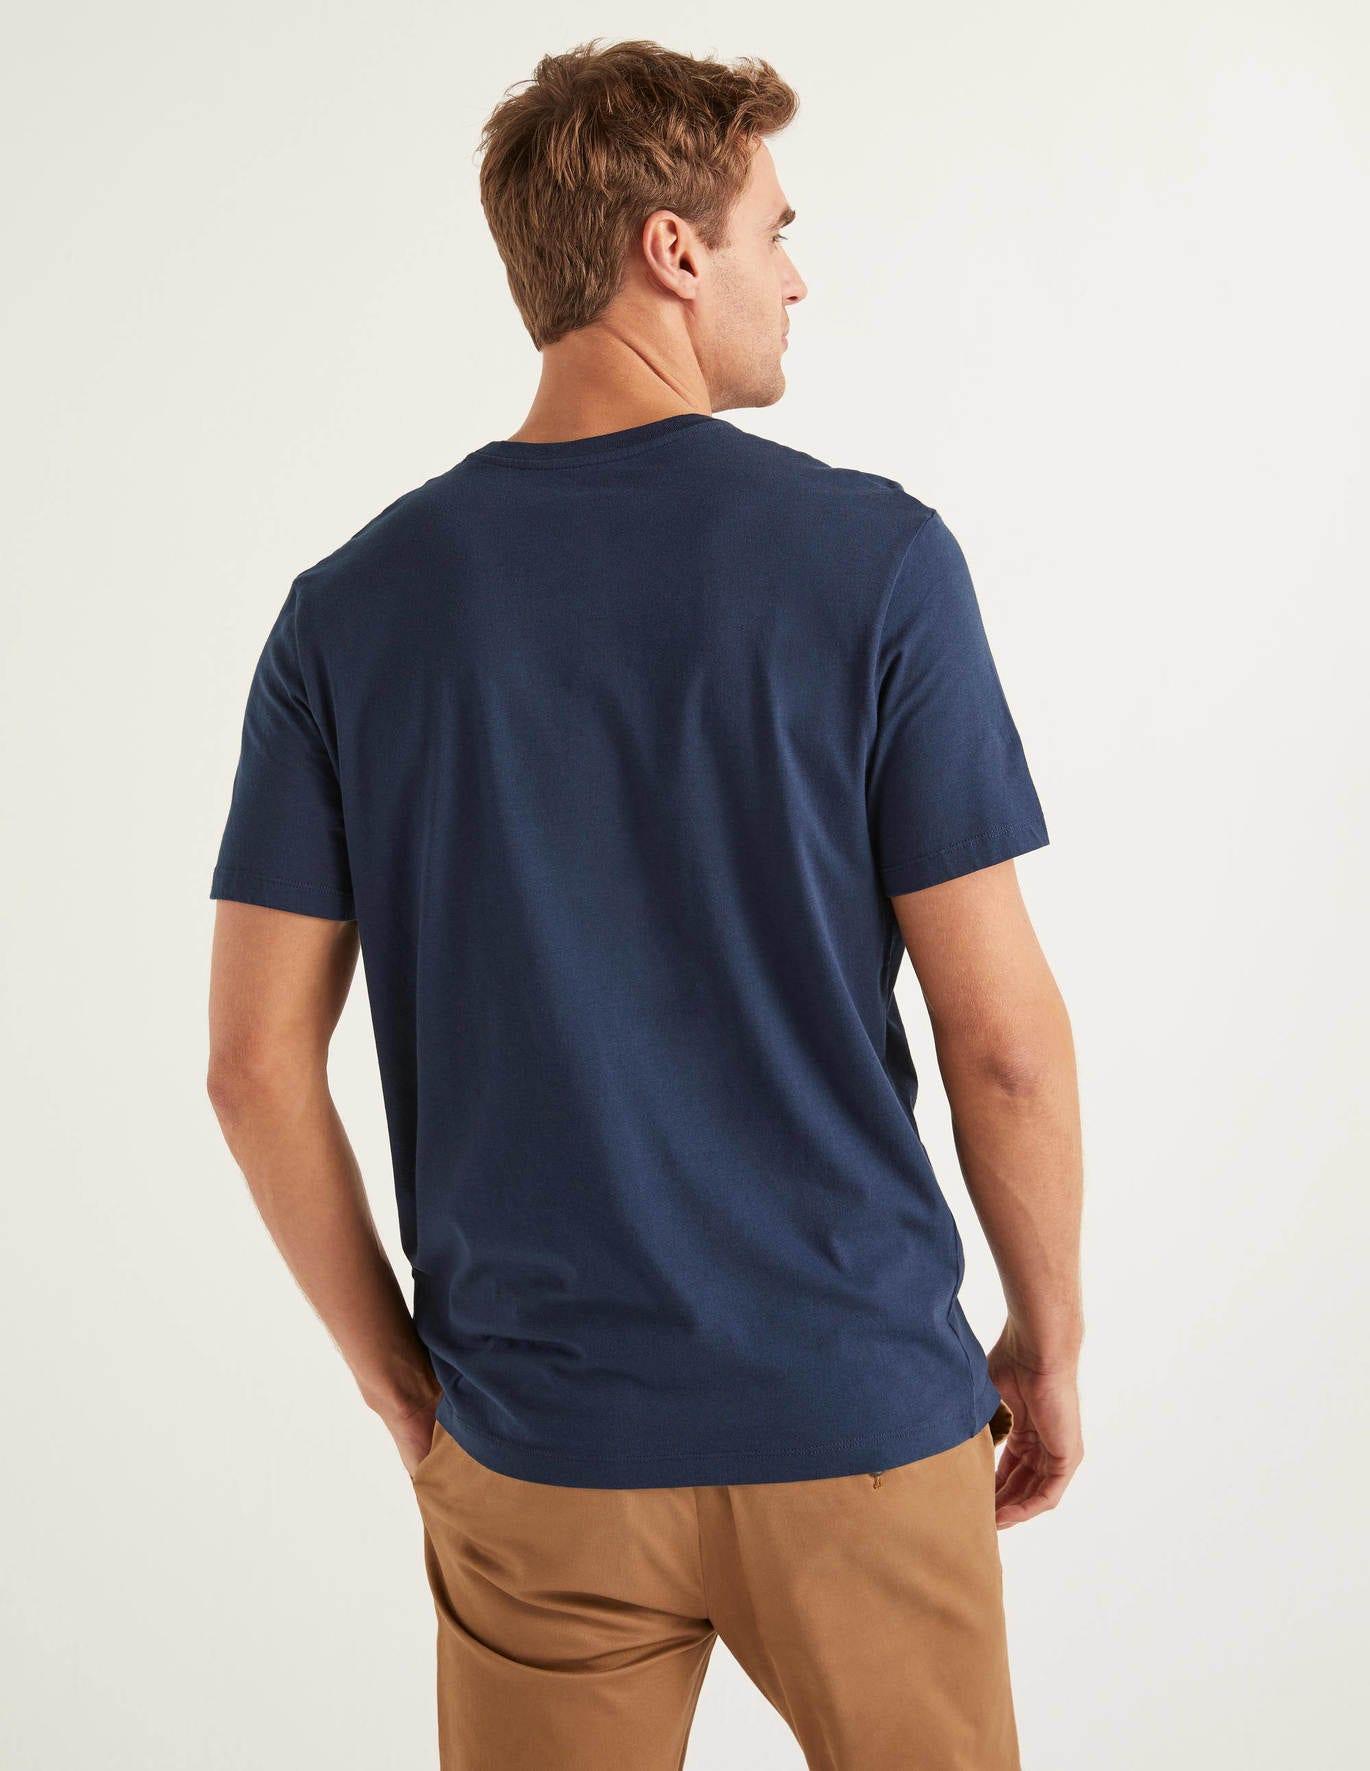 Boden Cotton Washed T-shirt Classic Navy in Blue for Men - Lyst